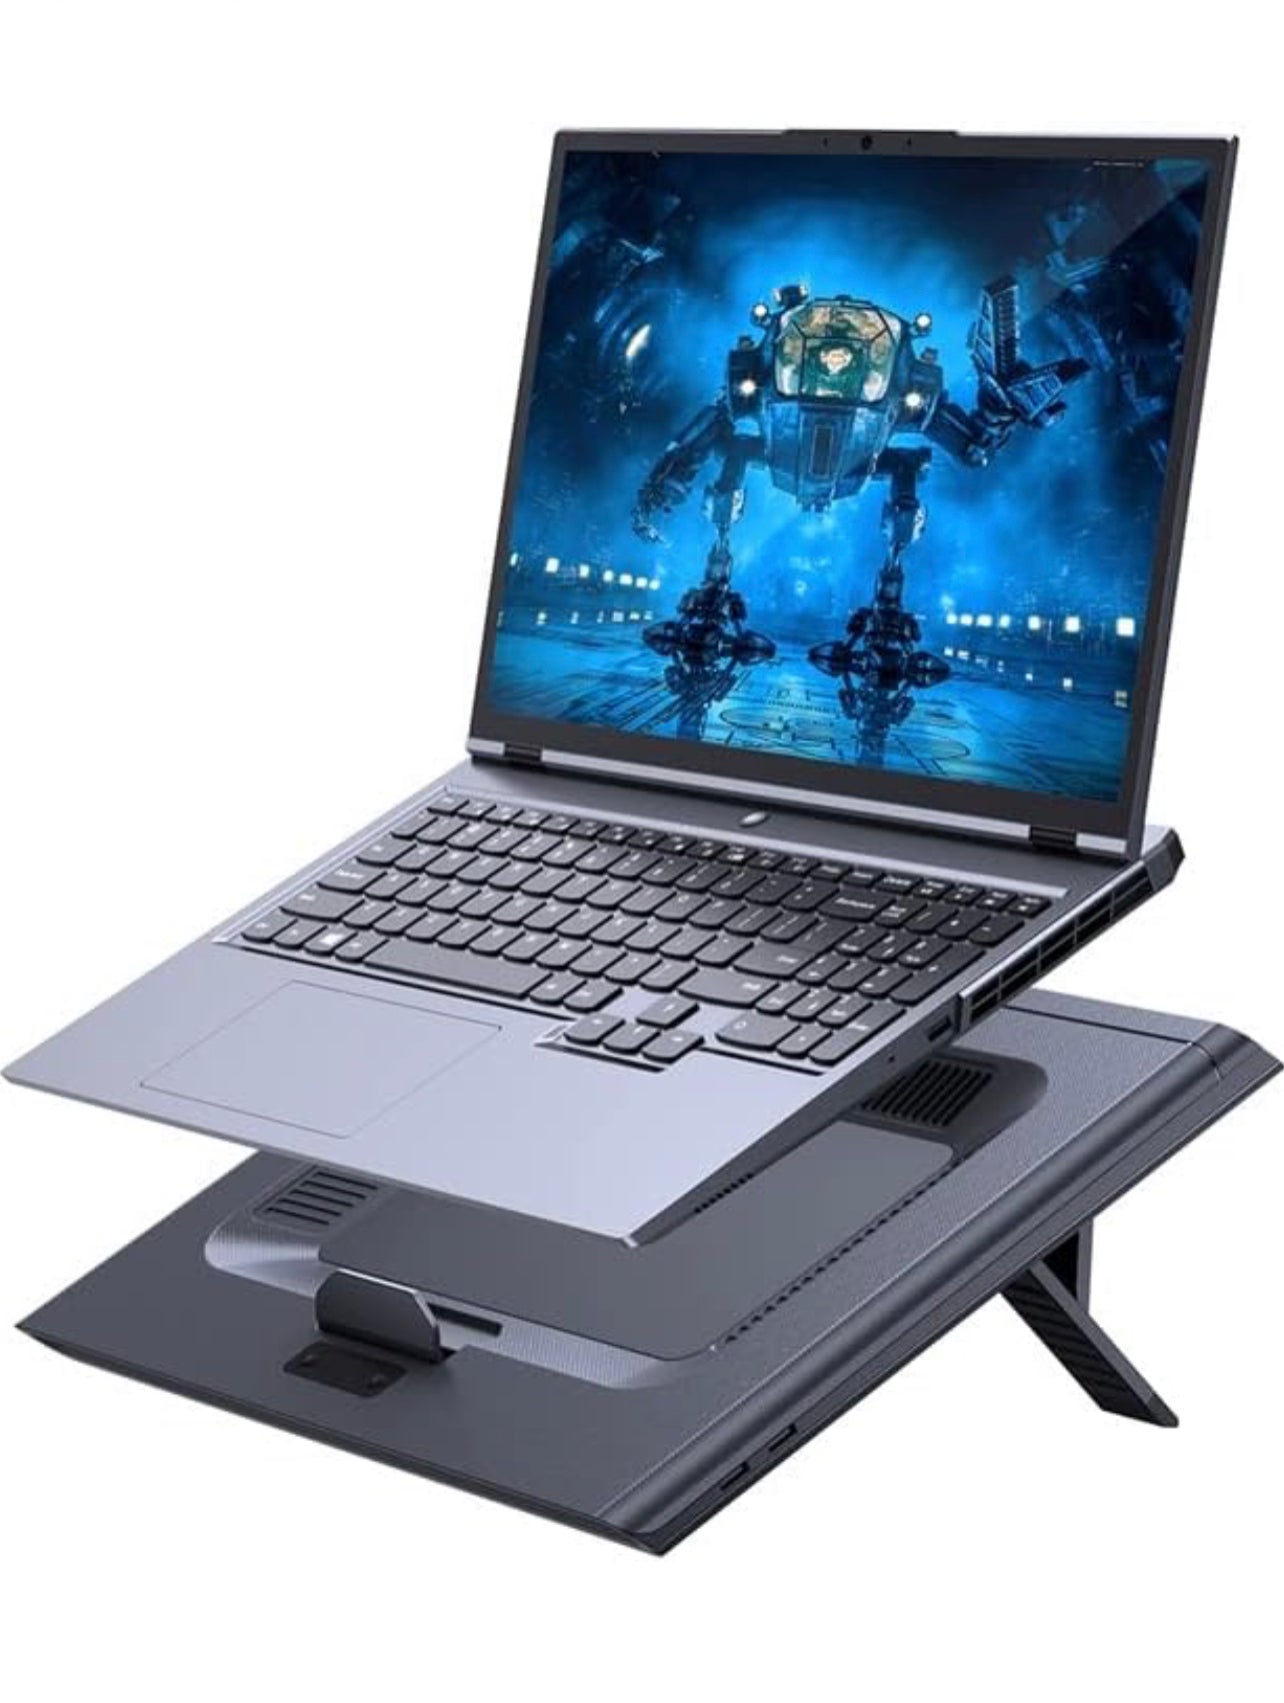 Baseus ThermoCool Heat-Dissipating Laptop Stand